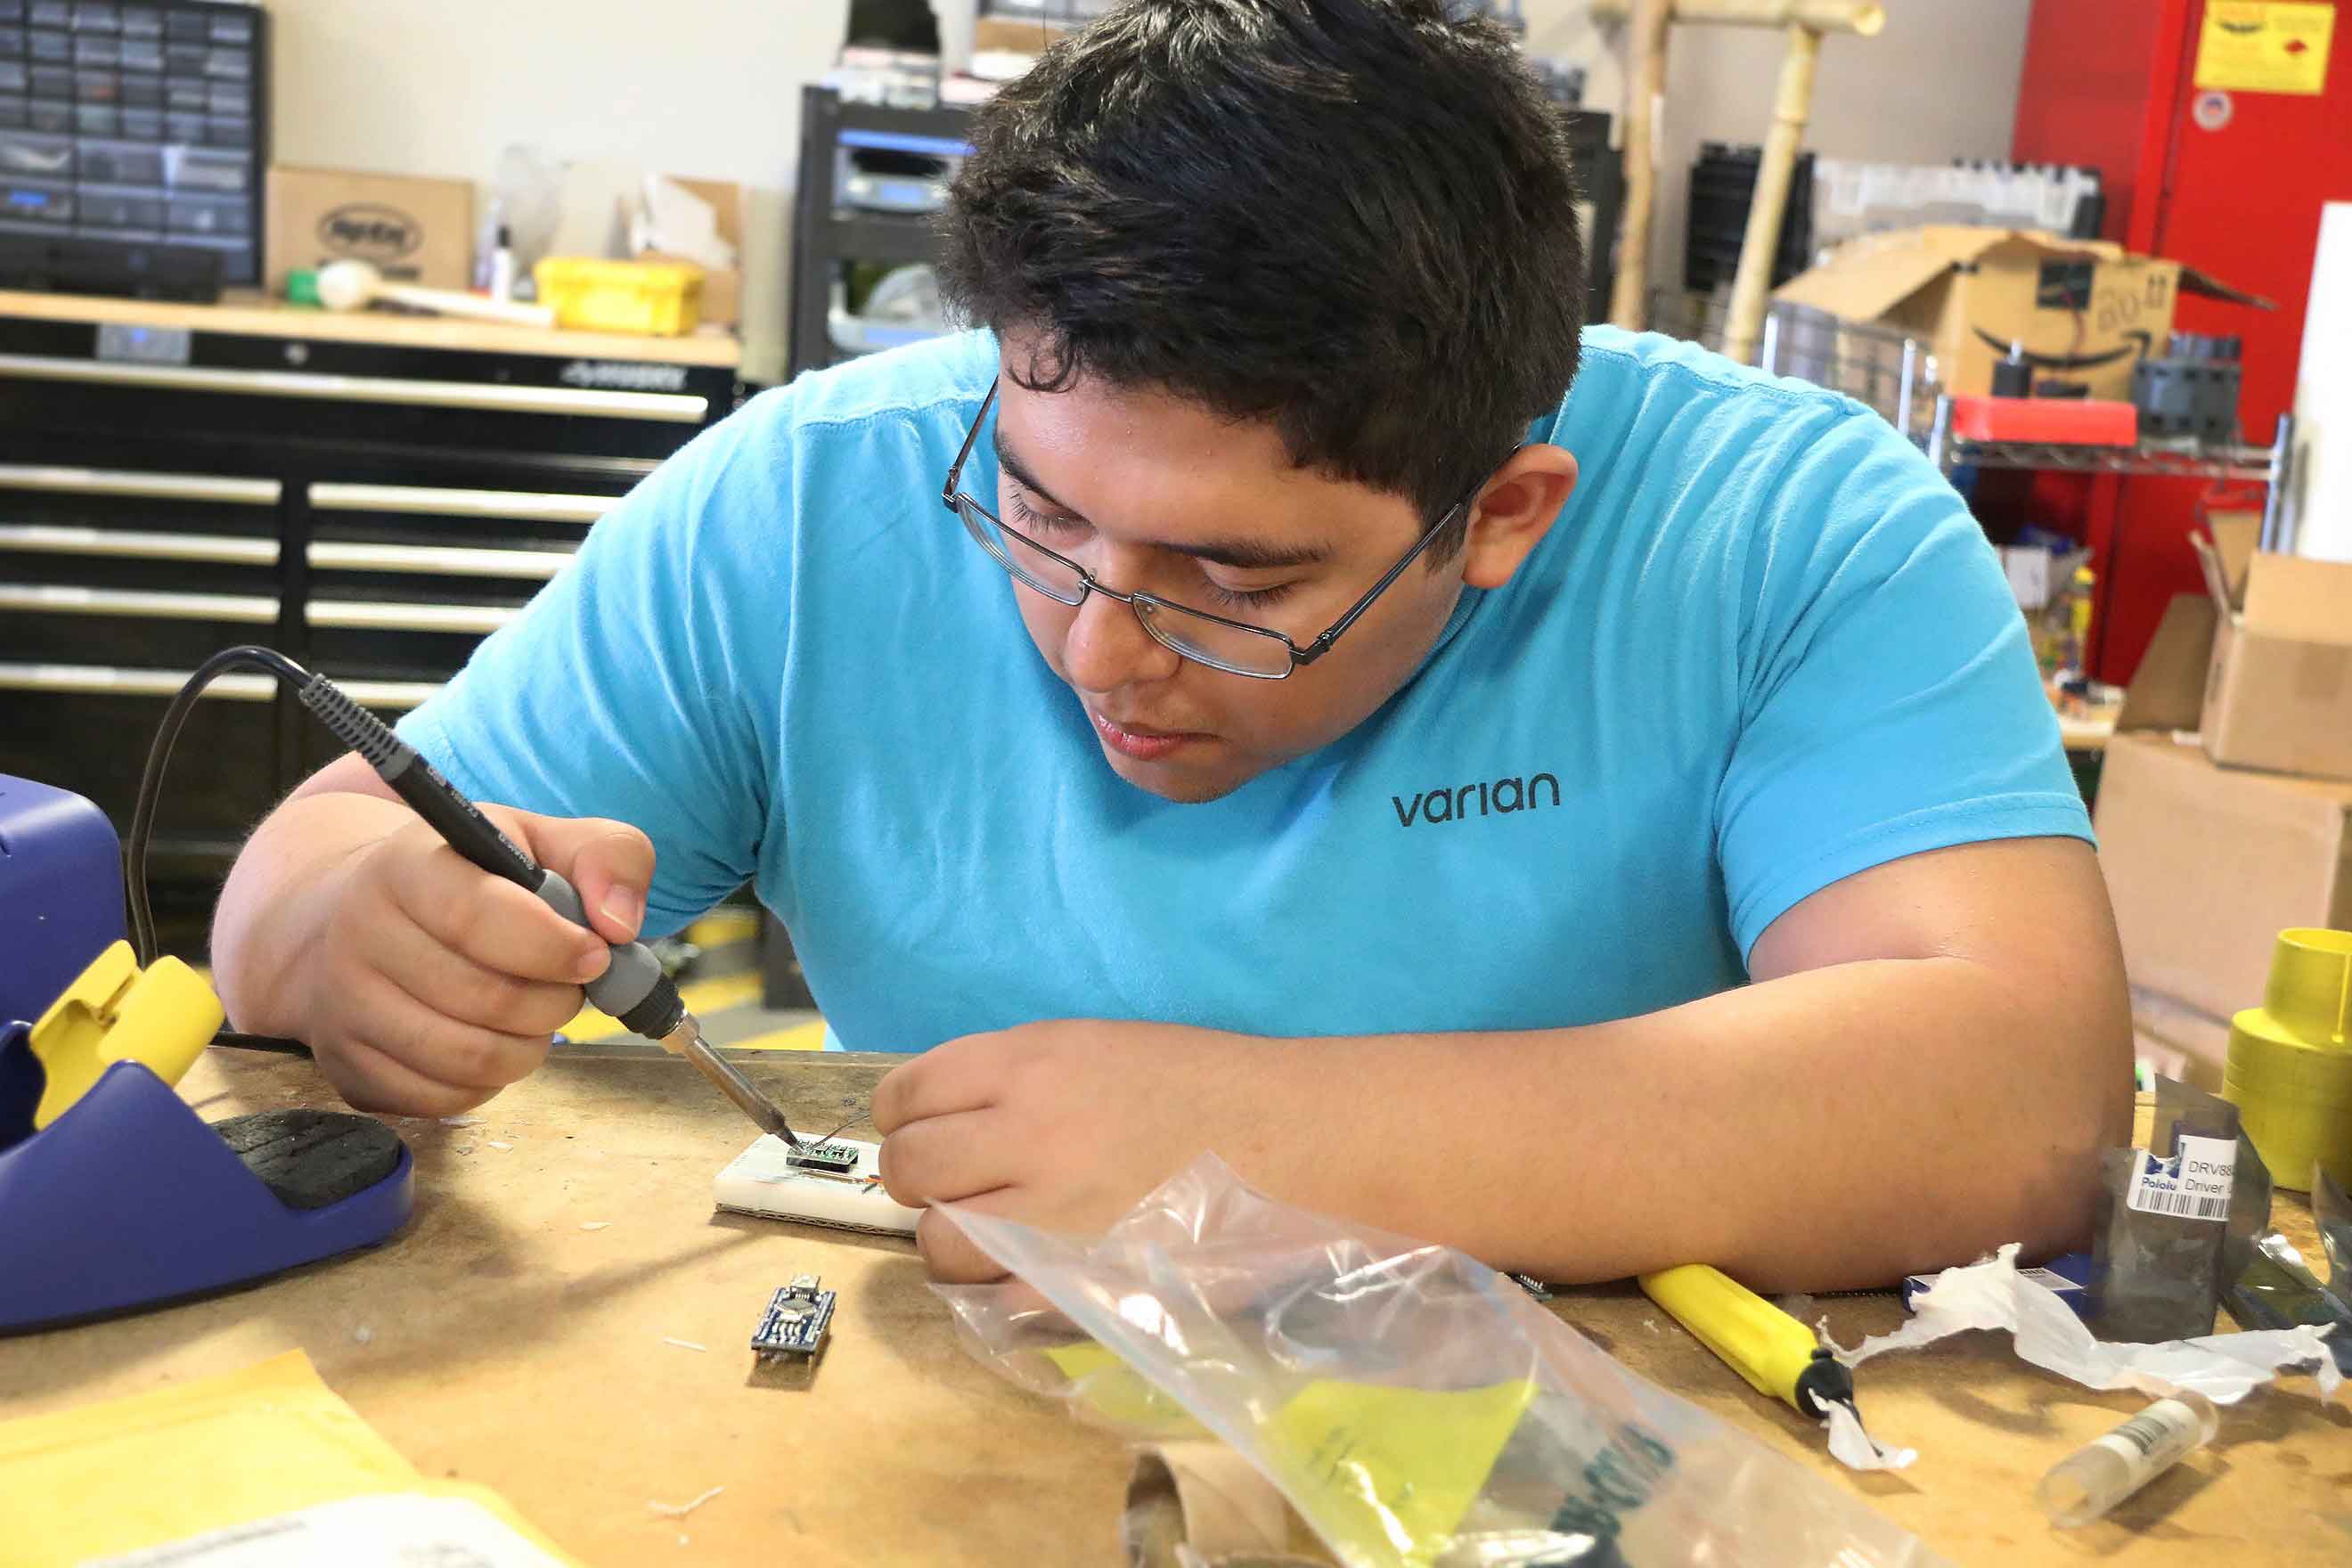 Student Christian Aguirre works with wiring that will be used on Julian's left hand